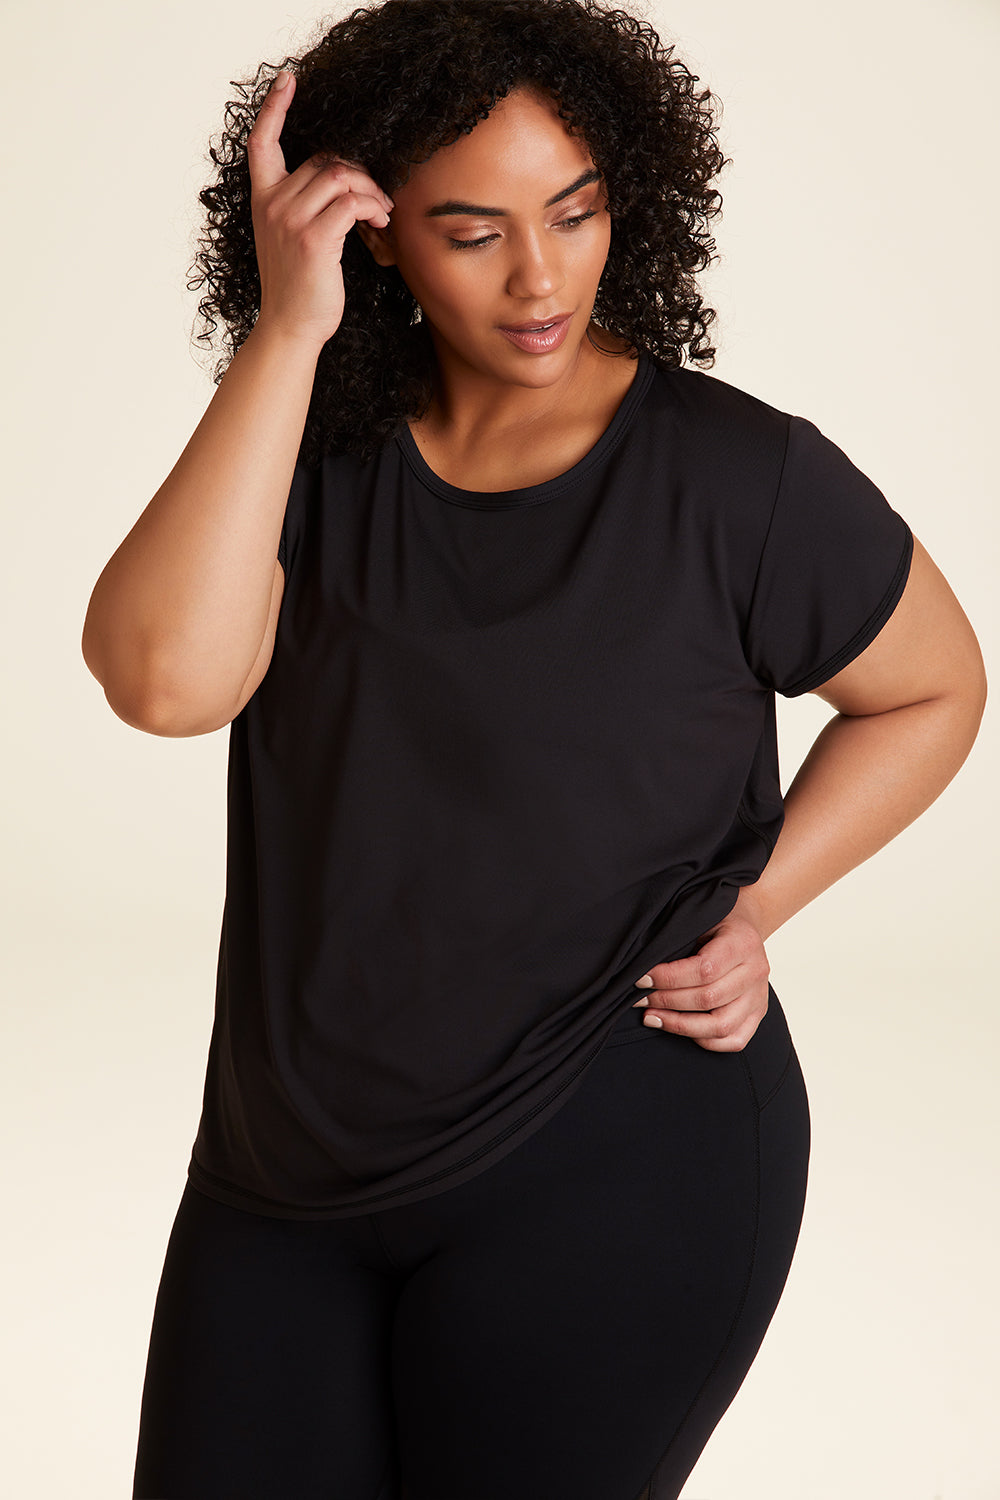 Front view of Alala Women's Luxury Athleisure blade tee in black